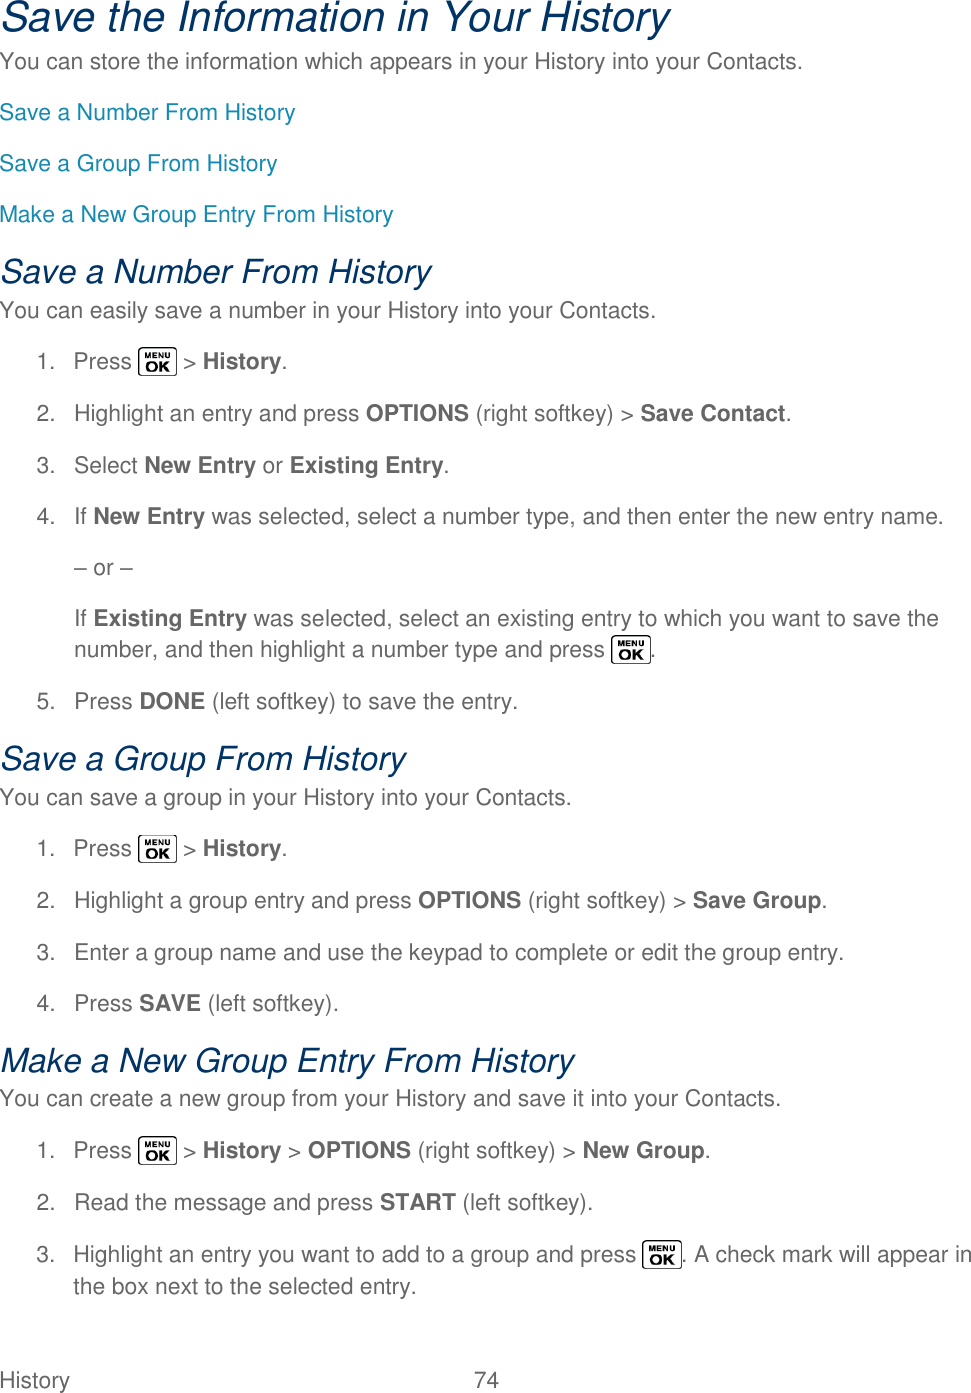  History   74   Save the Information in Your History You can store the information which appears in your History into your Contacts. Save a Number From History Save a Group From History Make a New Group Entry From History Save a Number From History You can easily save a number in your History into your Contacts. 1.  Press   &gt; History. 2.  Highlight an entry and press OPTIONS (right softkey) &gt; Save Contact. 3.  Select New Entry or Existing Entry. 4.  If New Entry was selected, select a number type, and then enter the new entry name. – or – If Existing Entry was selected, select an existing entry to which you want to save the number, and then highlight a number type and press  . 5.  Press DONE (left softkey) to save the entry. Save a Group From History You can save a group in your History into your Contacts. 1.  Press   &gt; History. 2.  Highlight a group entry and press OPTIONS (right softkey) &gt; Save Group. 3.  Enter a group name and use the keypad to complete or edit the group entry. 4.  Press SAVE (left softkey). Make a New Group Entry From History You can create a new group from your History and save it into your Contacts. 1.  Press   &gt; History &gt; OPTIONS (right softkey) &gt; New Group. 2.  Read the message and press START (left softkey). 3.  Highlight an entry you want to add to a group and press  . A check mark will appear in the box next to the selected entry. 